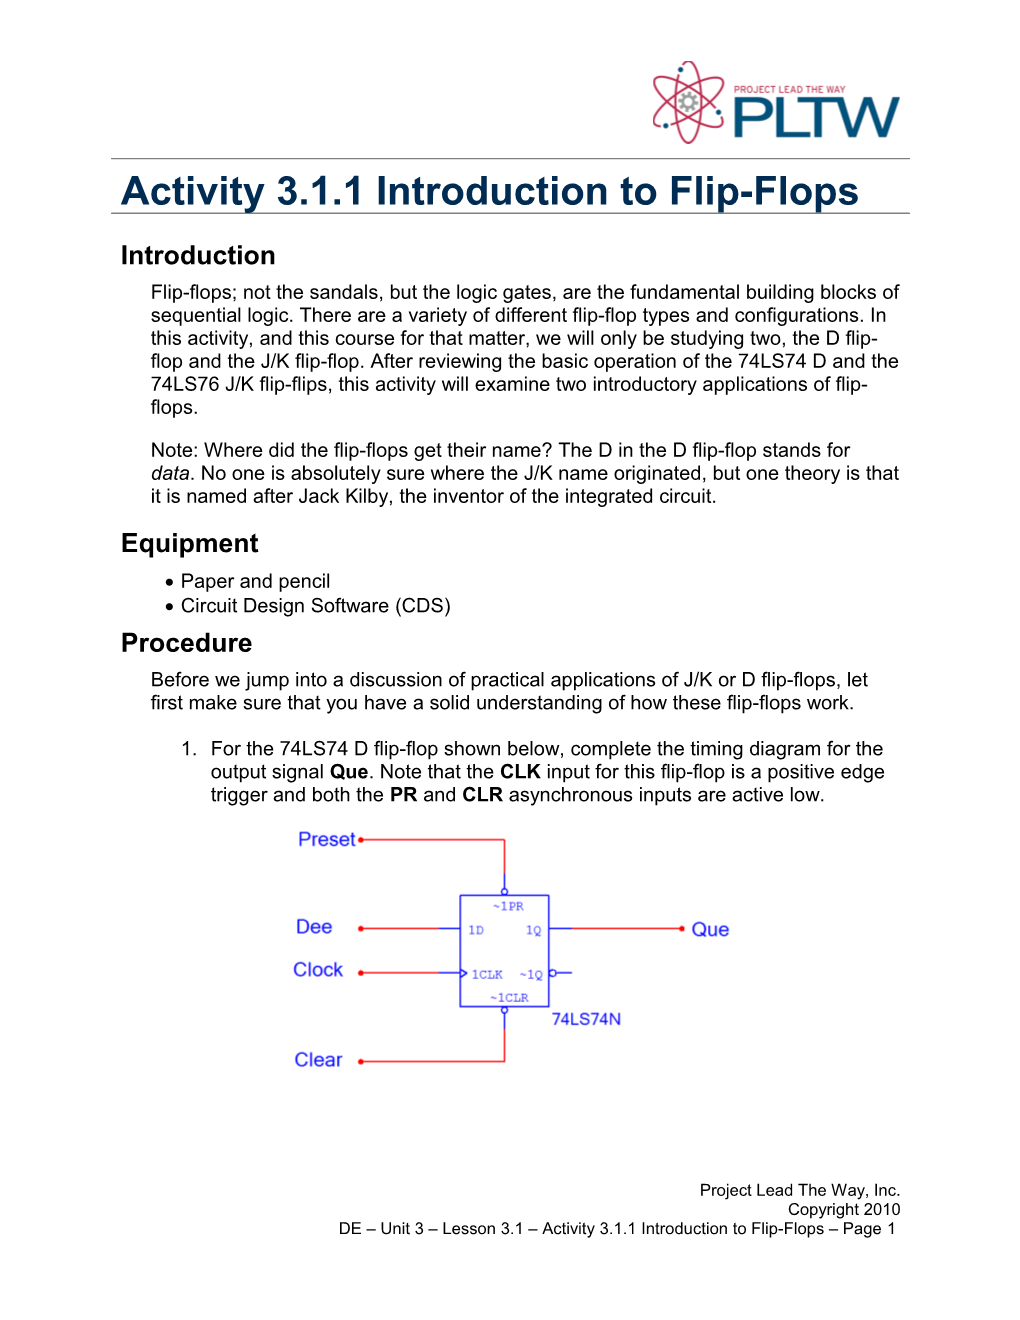 Activity 1.3.1 Introduction to Flip Flops